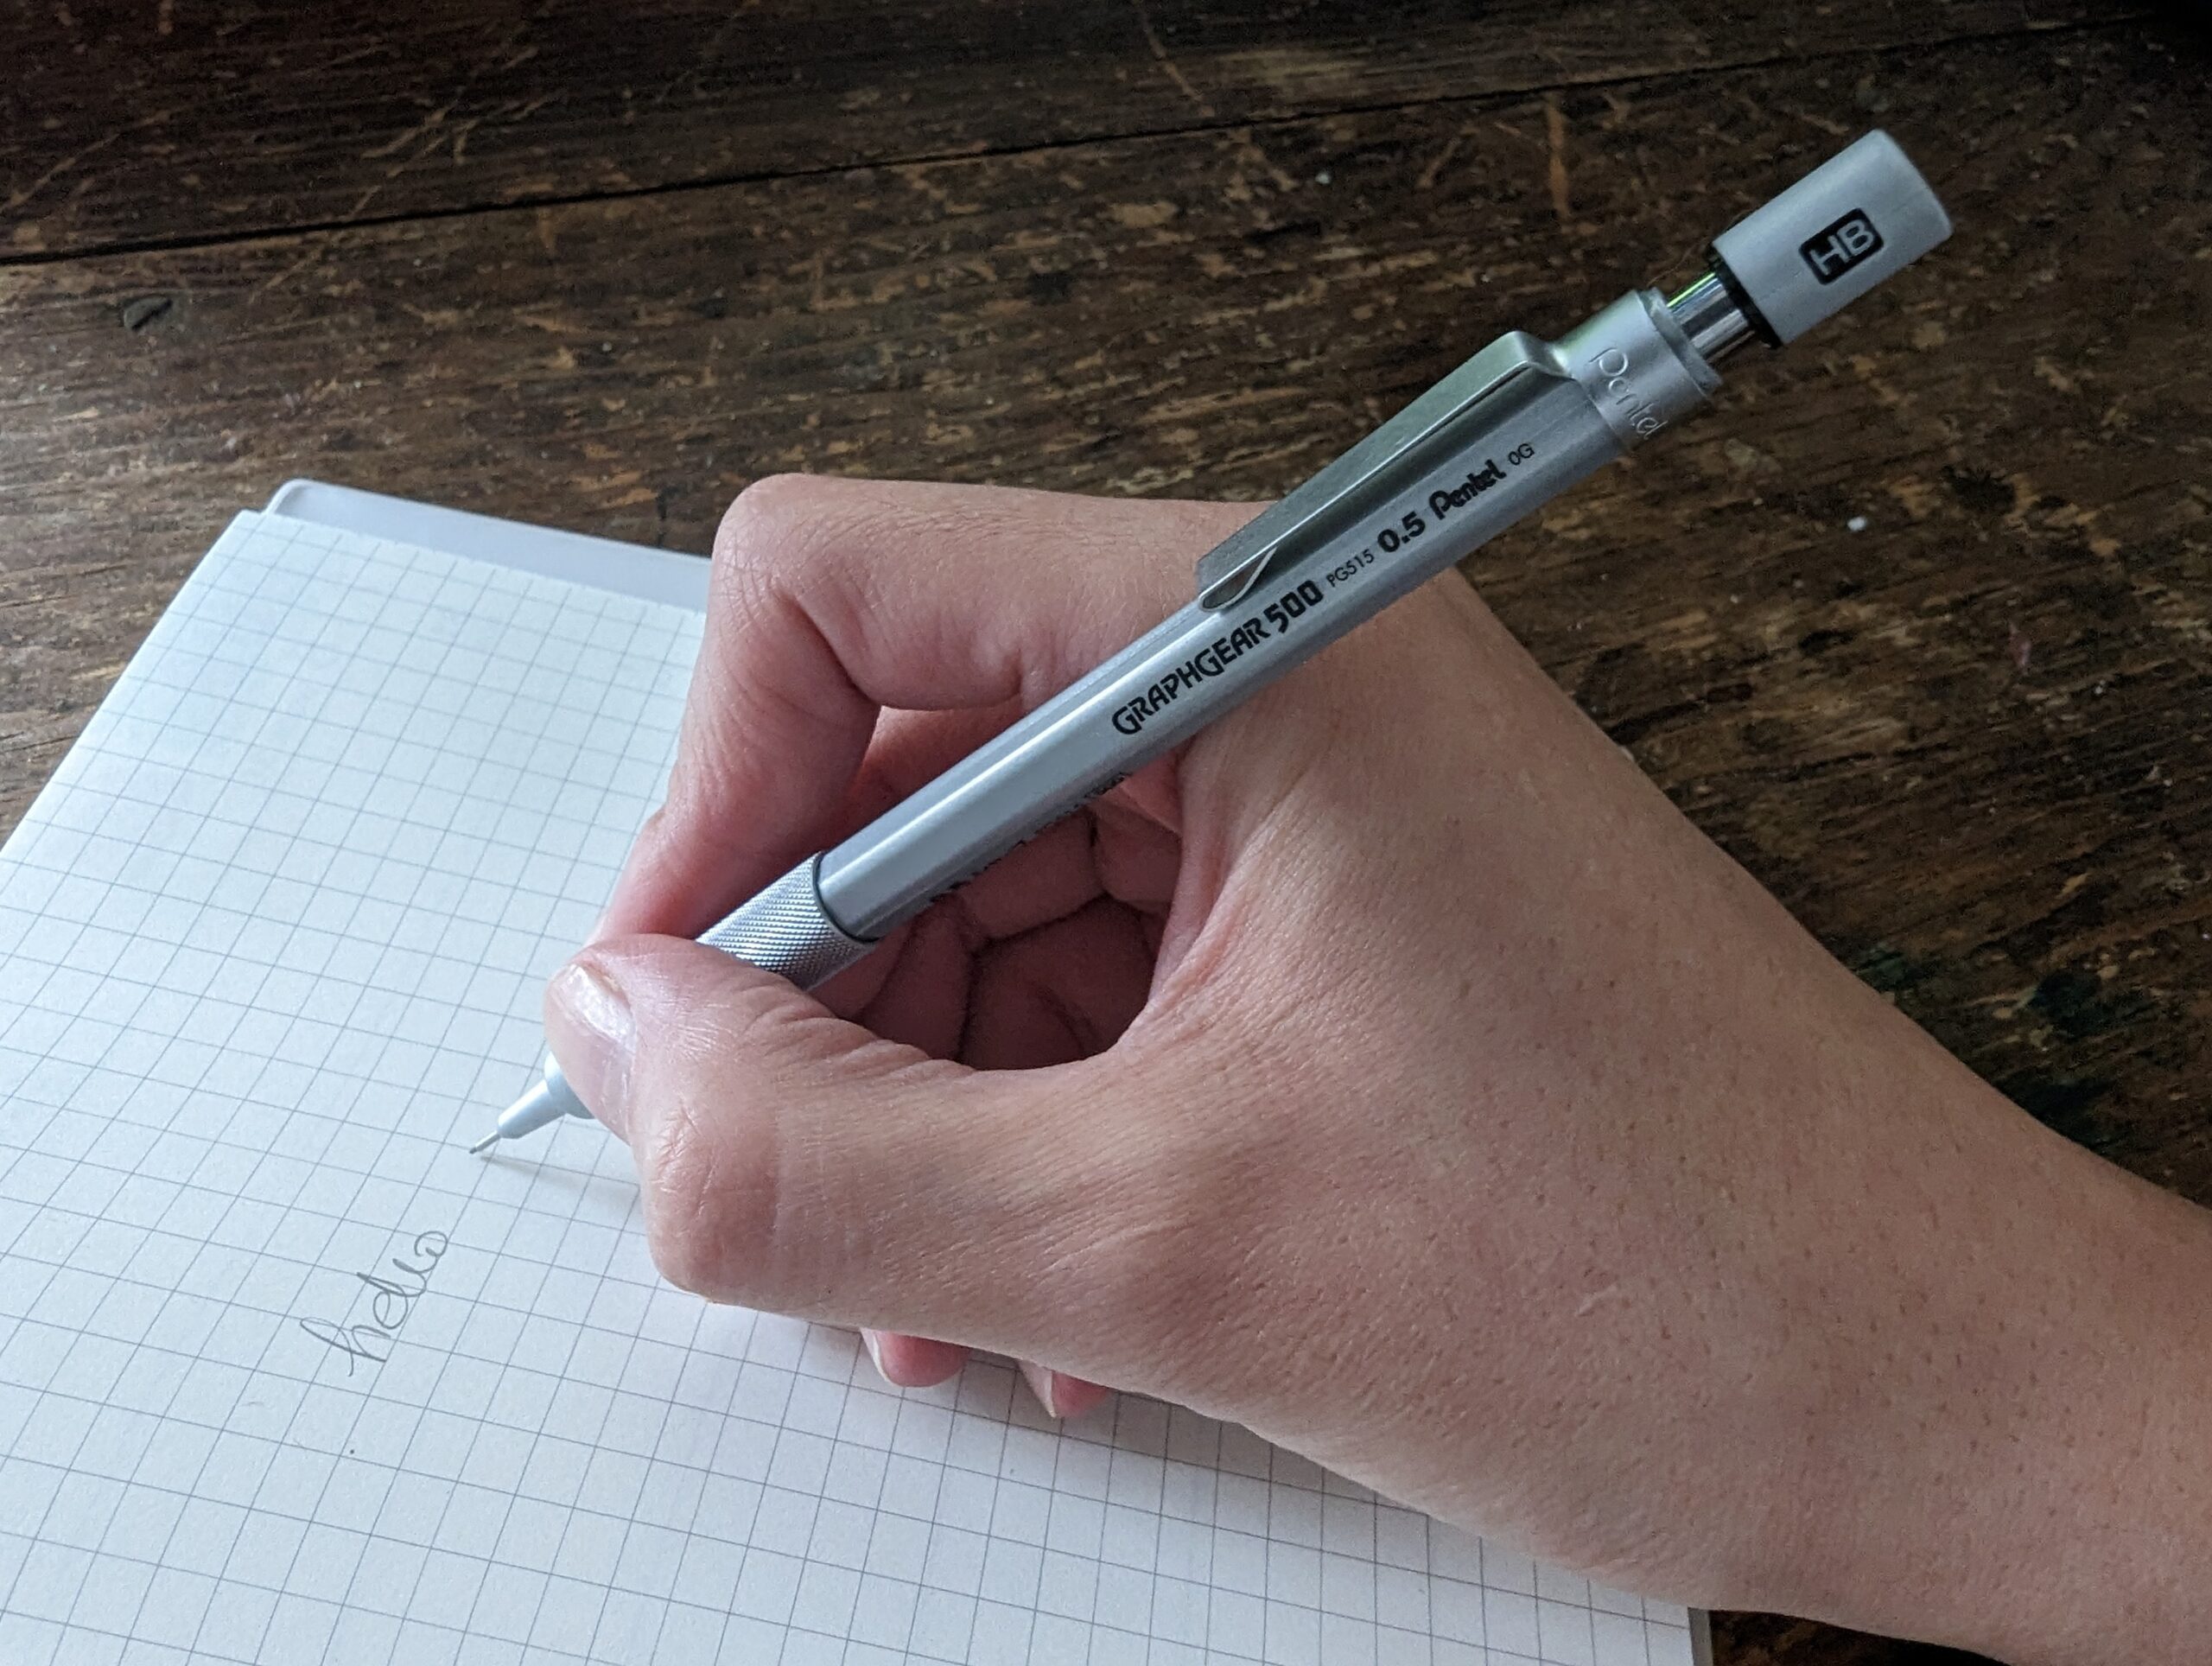 A person holding a mechanical pencil and writing "hello" on a piece of checkered notebook paper.